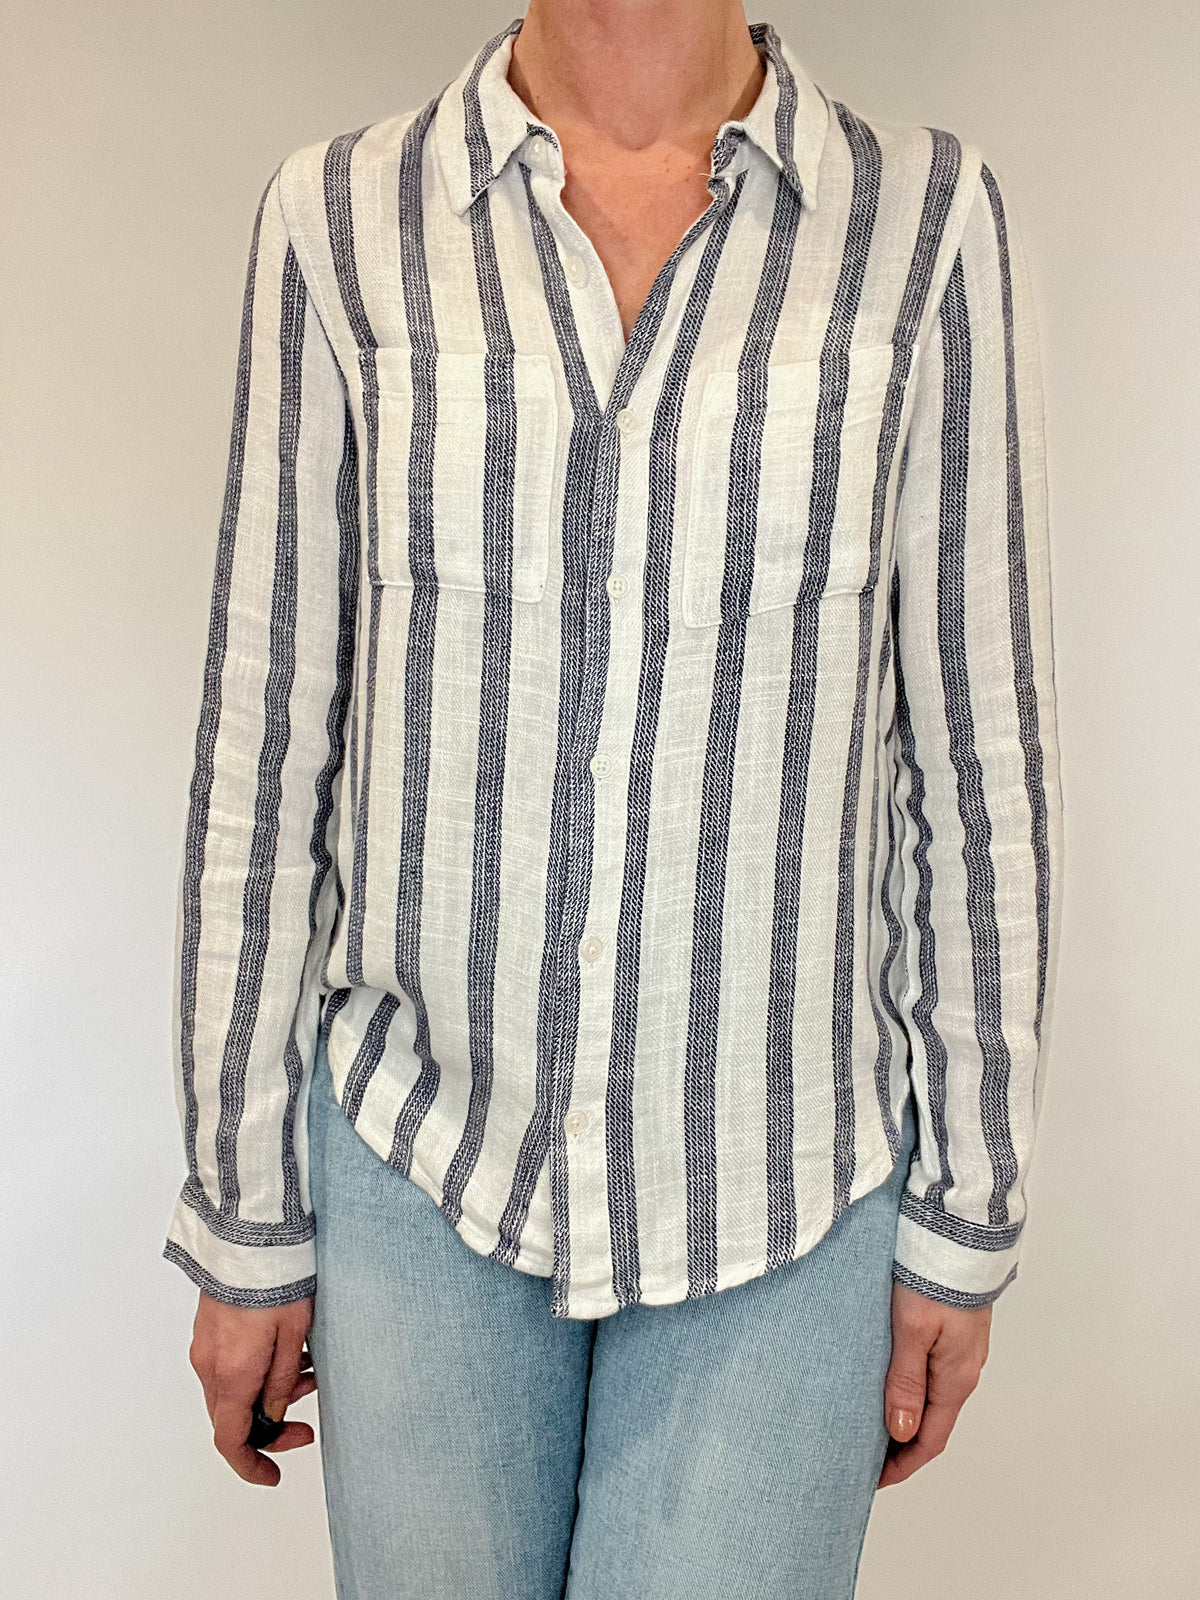 Introducing the Bestie Shirt in Blue, your new companion for the spring and summer season. Made with a luxurious linen blend, this stylish striped shirt is versatile enough to pair with any casual denim and sandals. Let it be your go-to piece for effortless fashion.